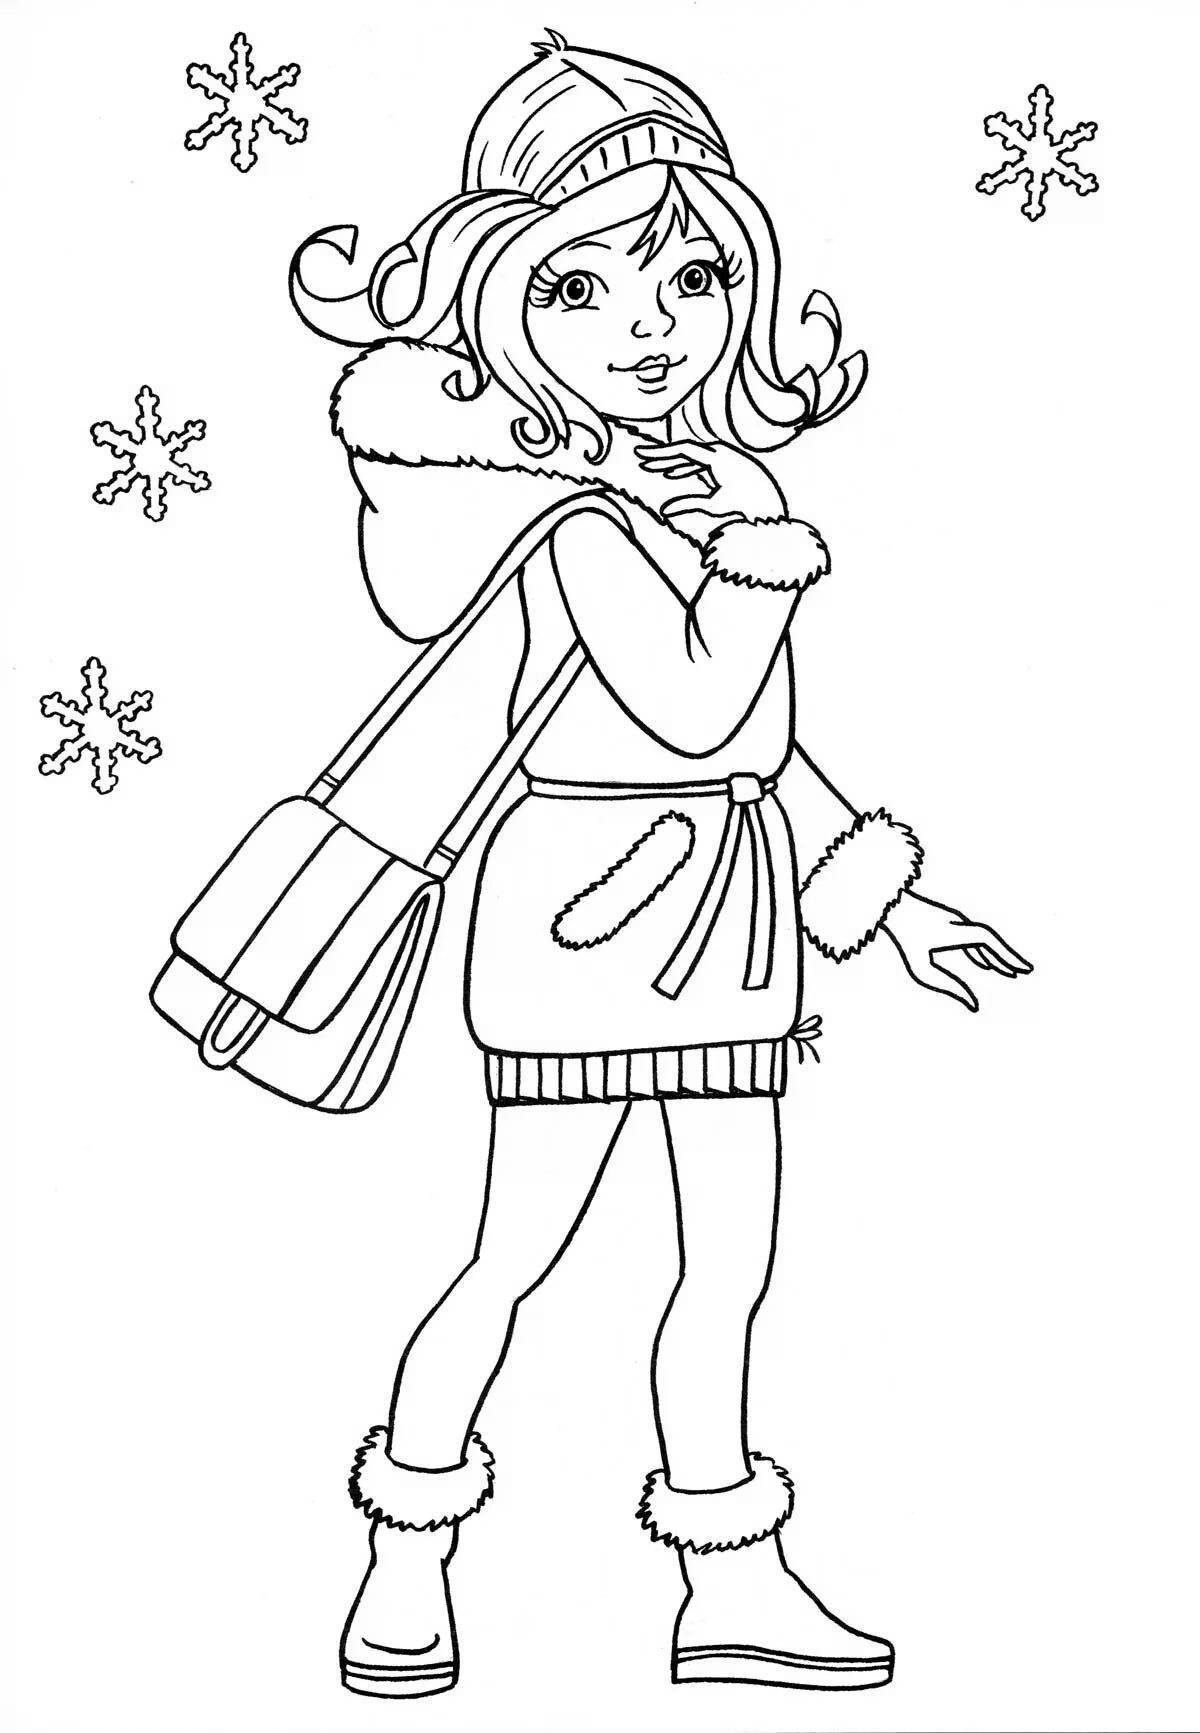 Amazing Christmas coloring pages for 10 year old girls